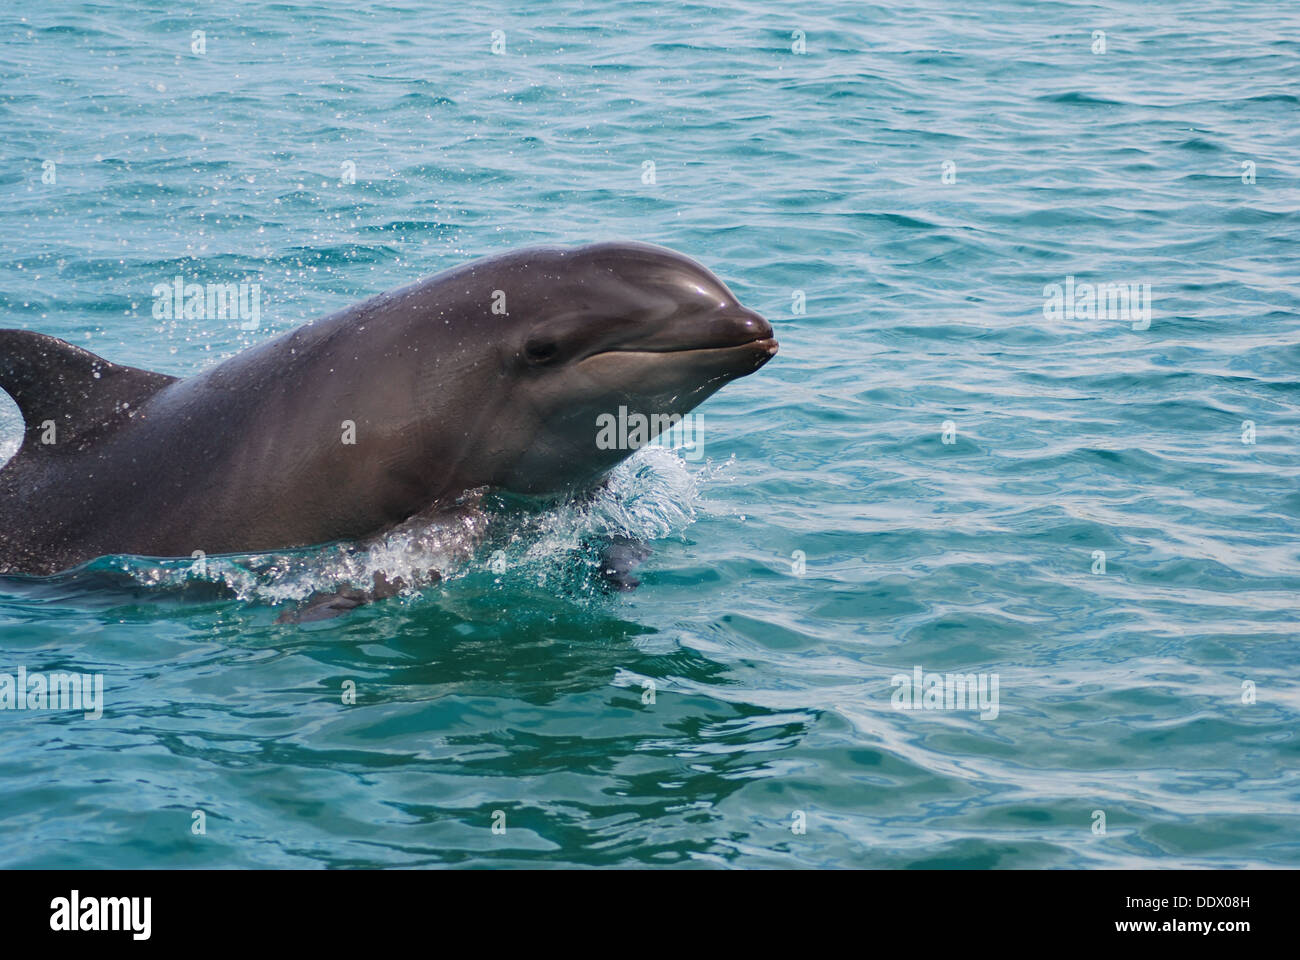 Dolphin jumping in ocean. Stock Photo